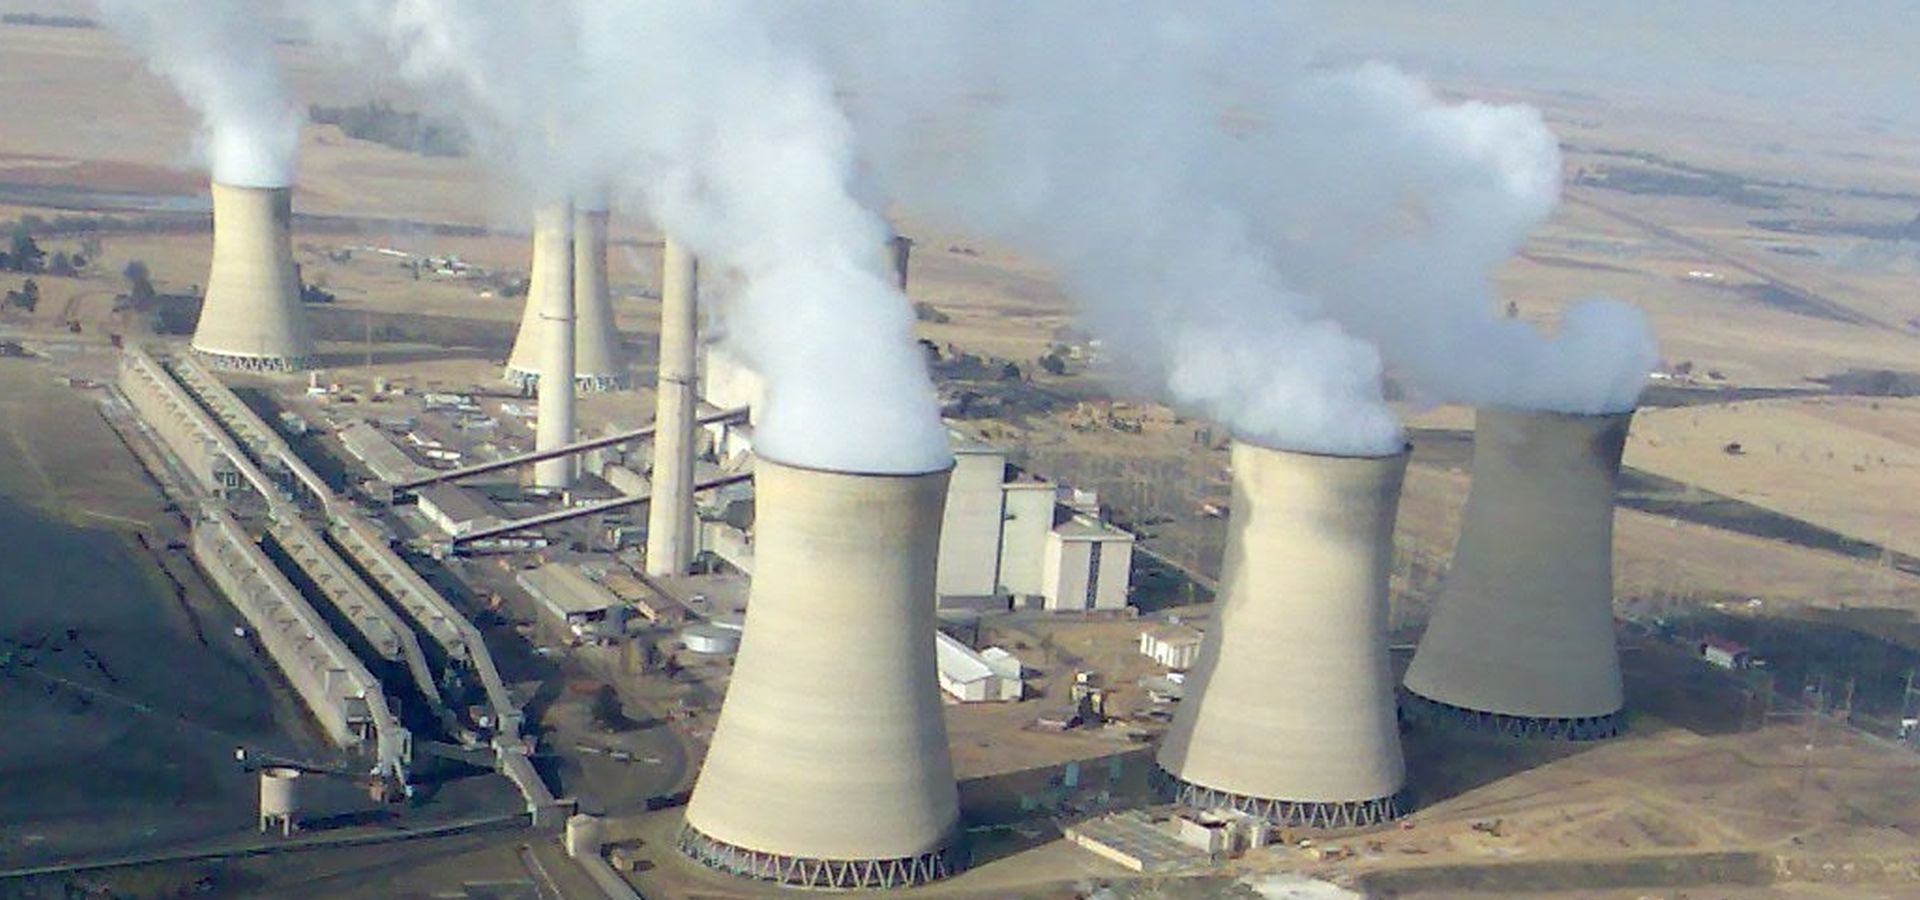 A coal power station in South Africa